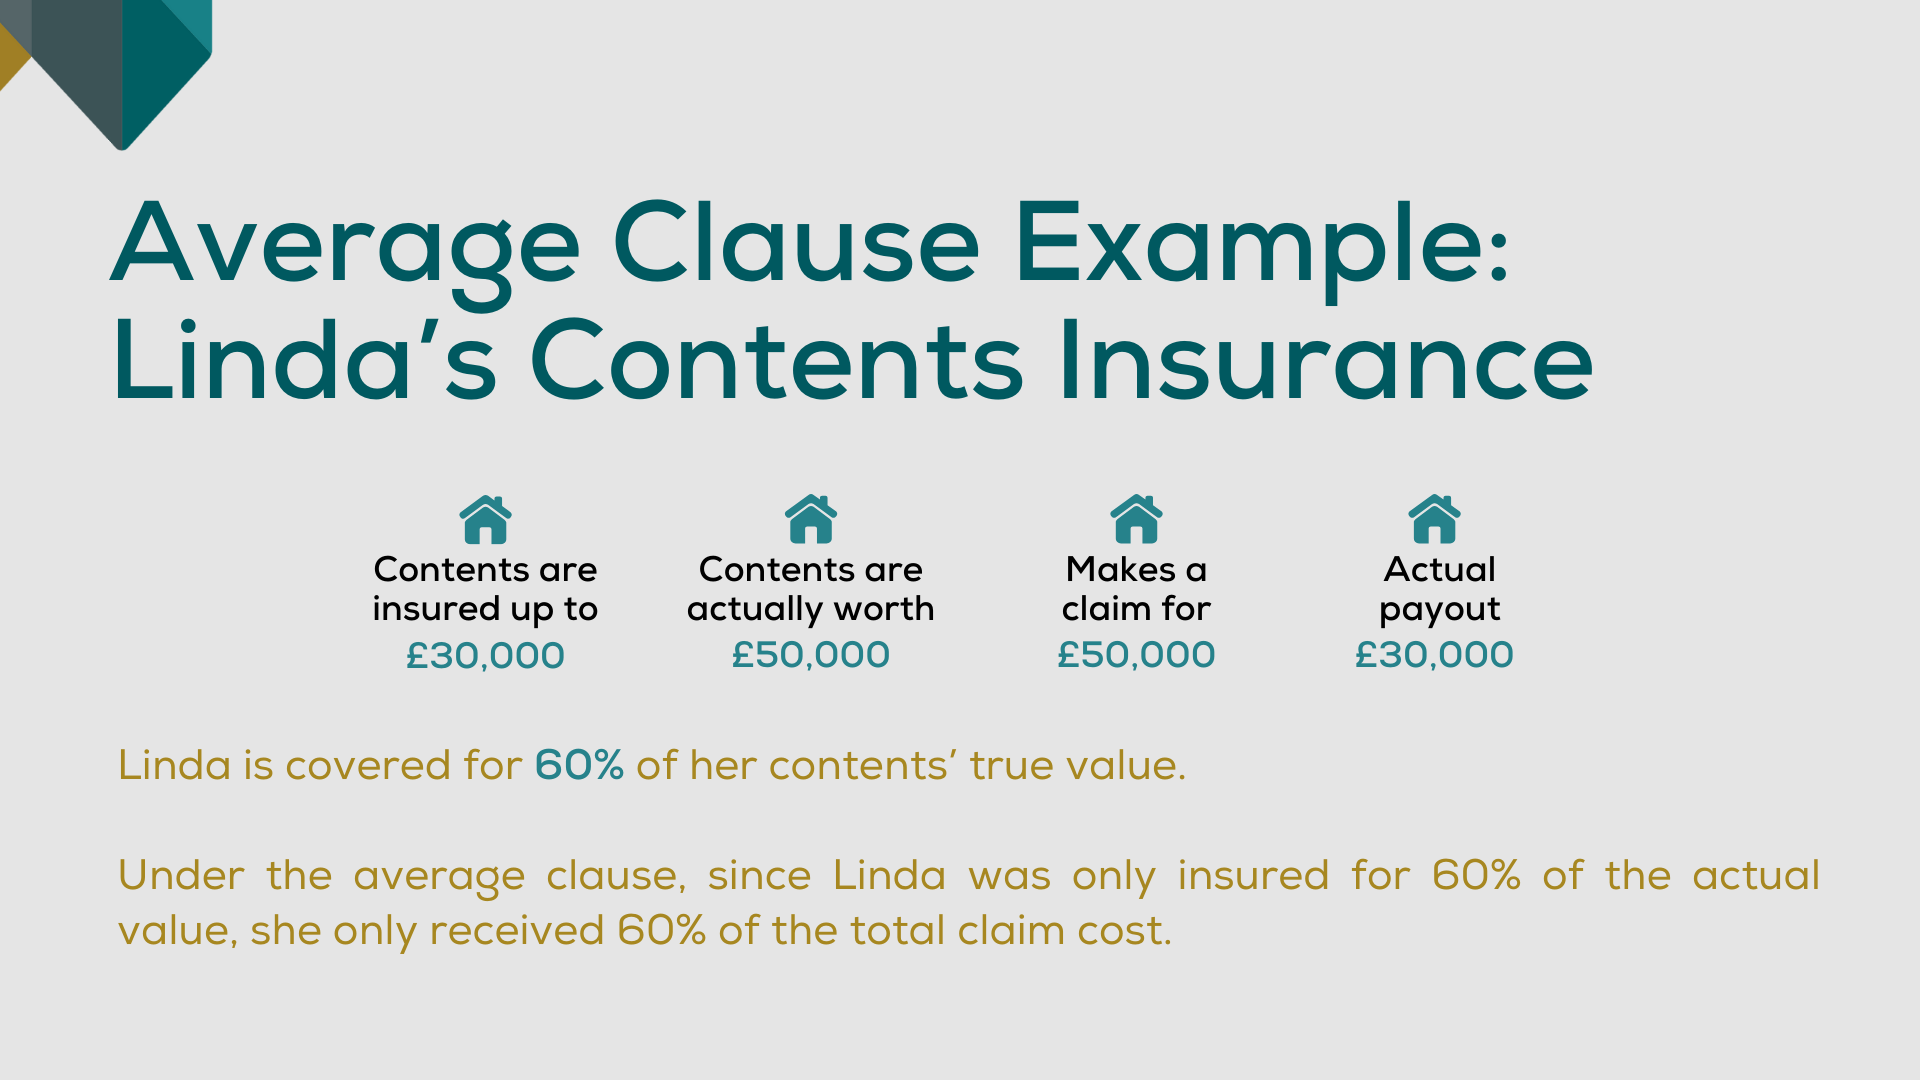 An infographic showing how underinsurance works with Contents Insurance.